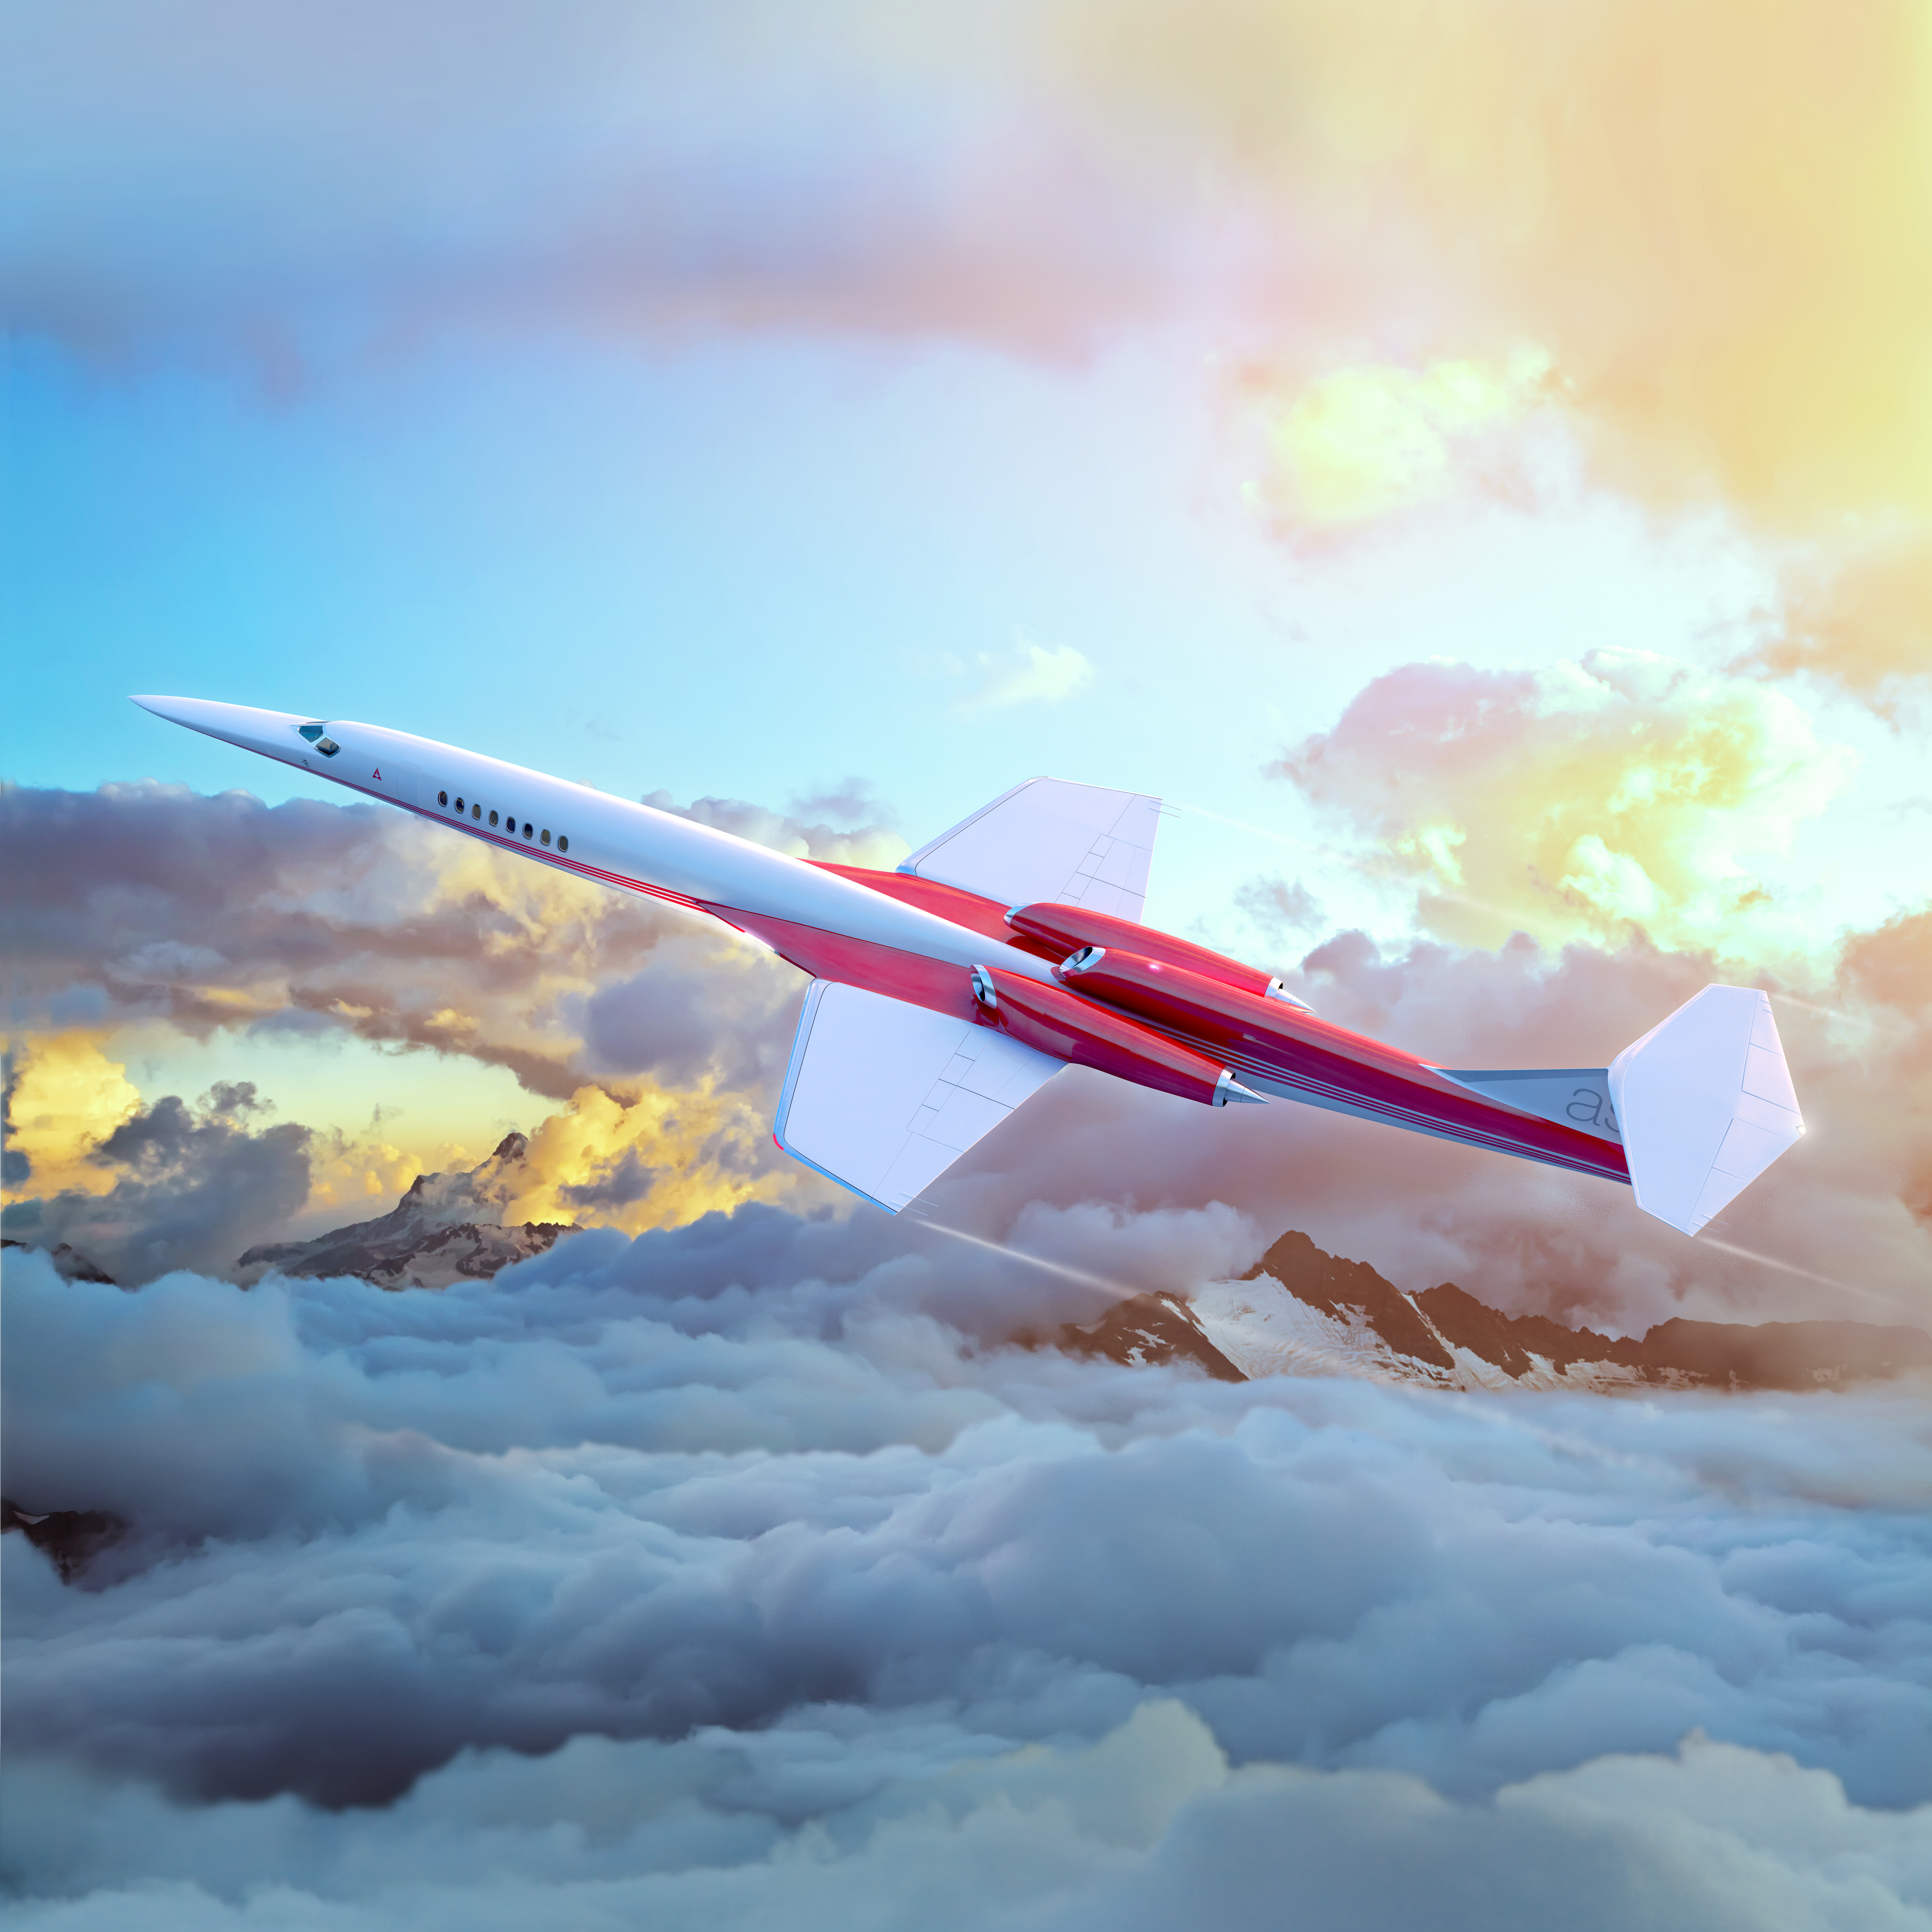 The proposed supersonic jet could have a strong and light 10-spar carbon fiber wing structure.